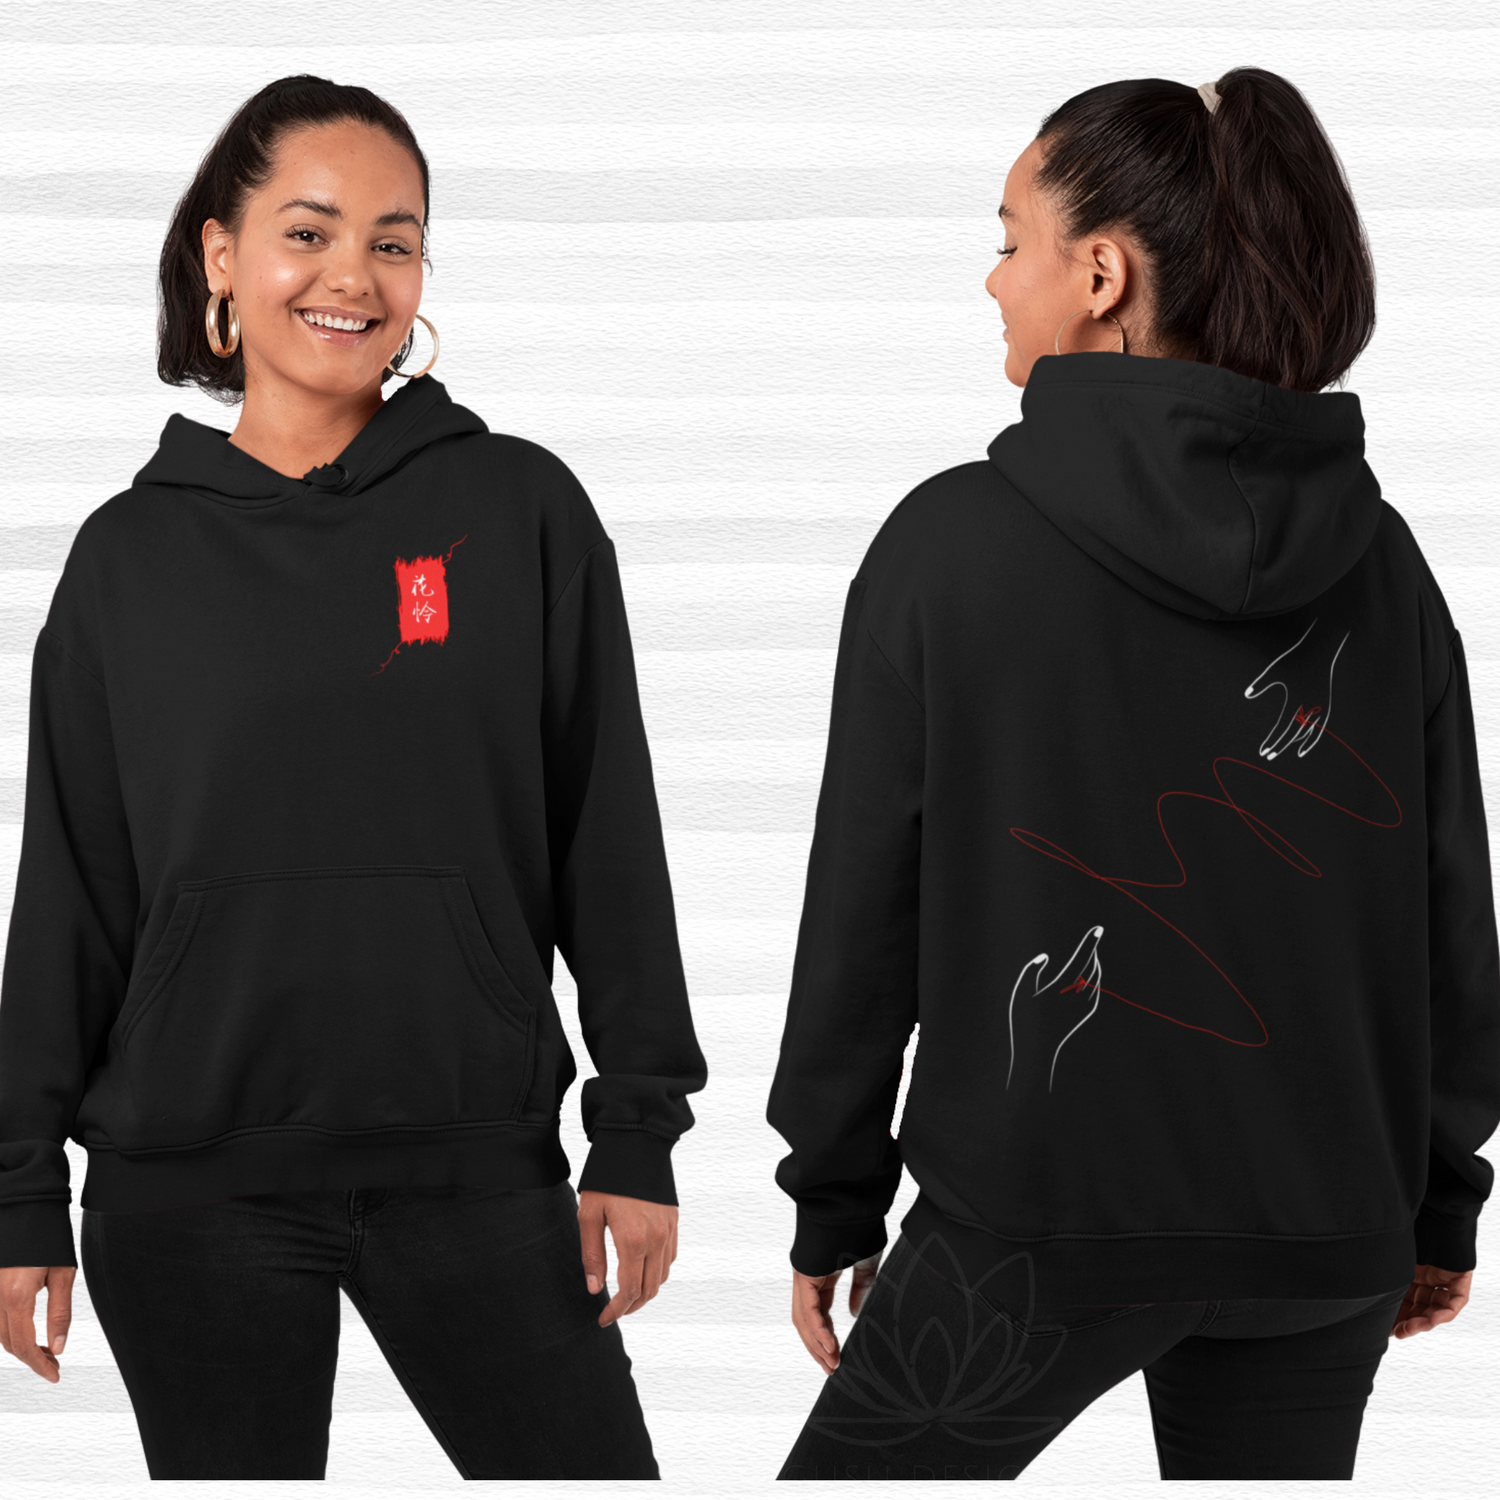 Blank Hoodies with Colored Drawstrings 